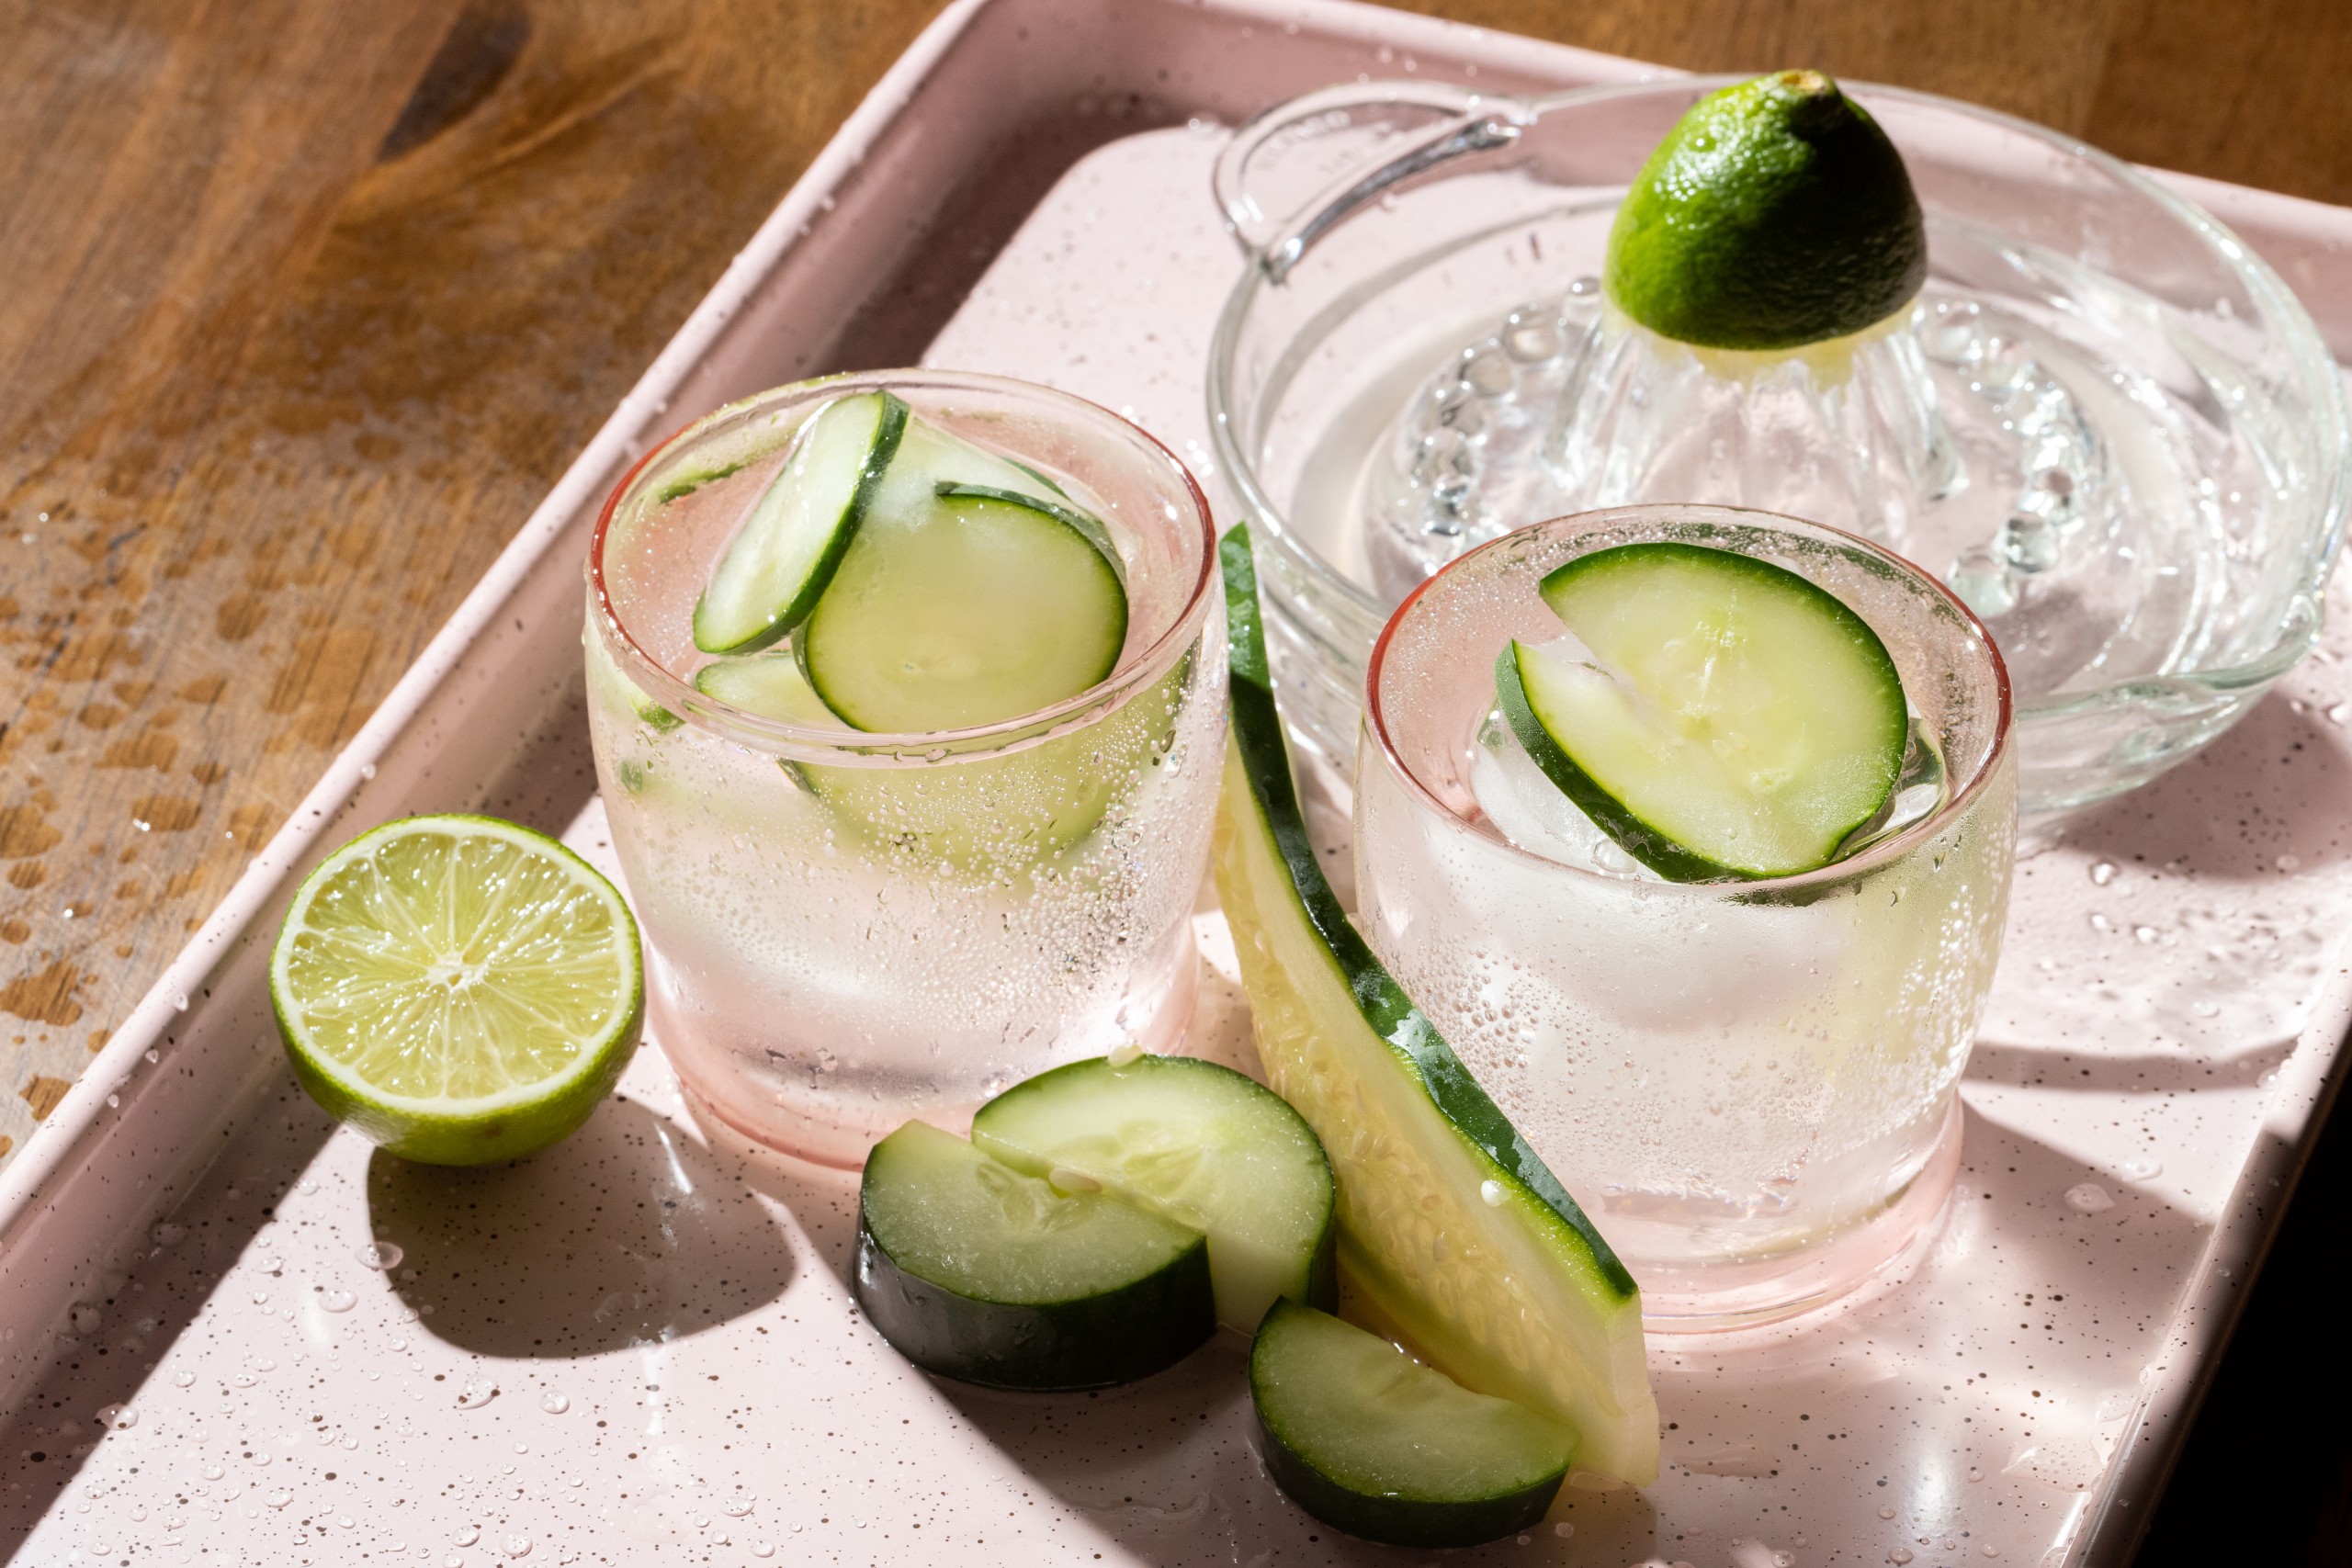 Cucumber Tequila and Tonic, a twist on the classic gin and tonic